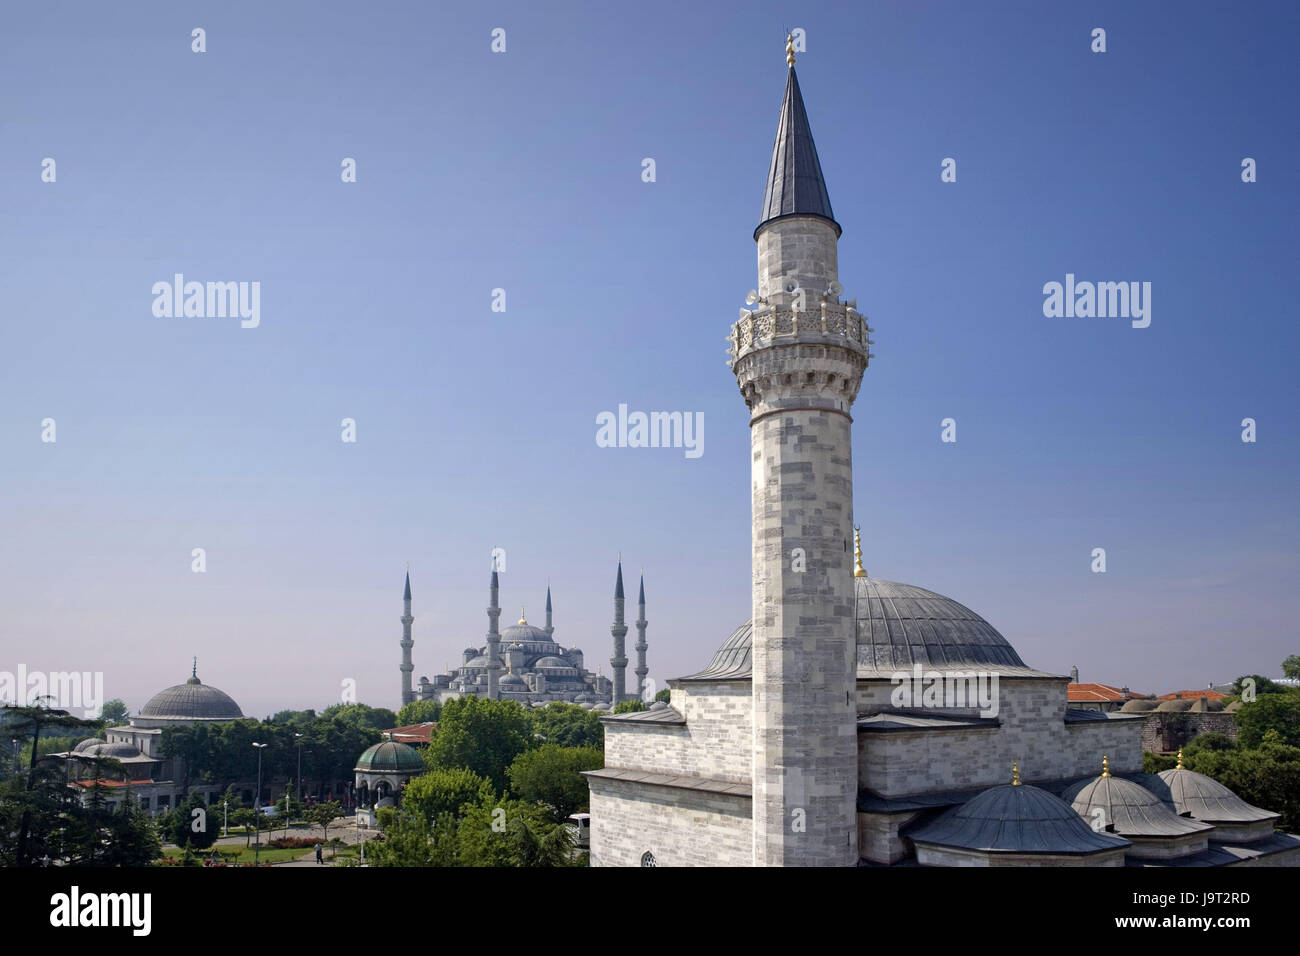 Turkey,Istanbul,Firuz Aga Mosque,sultan Ahmet Camii,'blue mosque',town,city,metropolis,port,culture,faith,religion,Islam,structures,historically,architecture,church,sacred construction,Sultan-Ahmet-Camii,sultan's Ahmed's mosque,mosques,domed building,towers,landmarks,places of interest,minarets,domes,heavens,blue,cloudless, Stock Photo